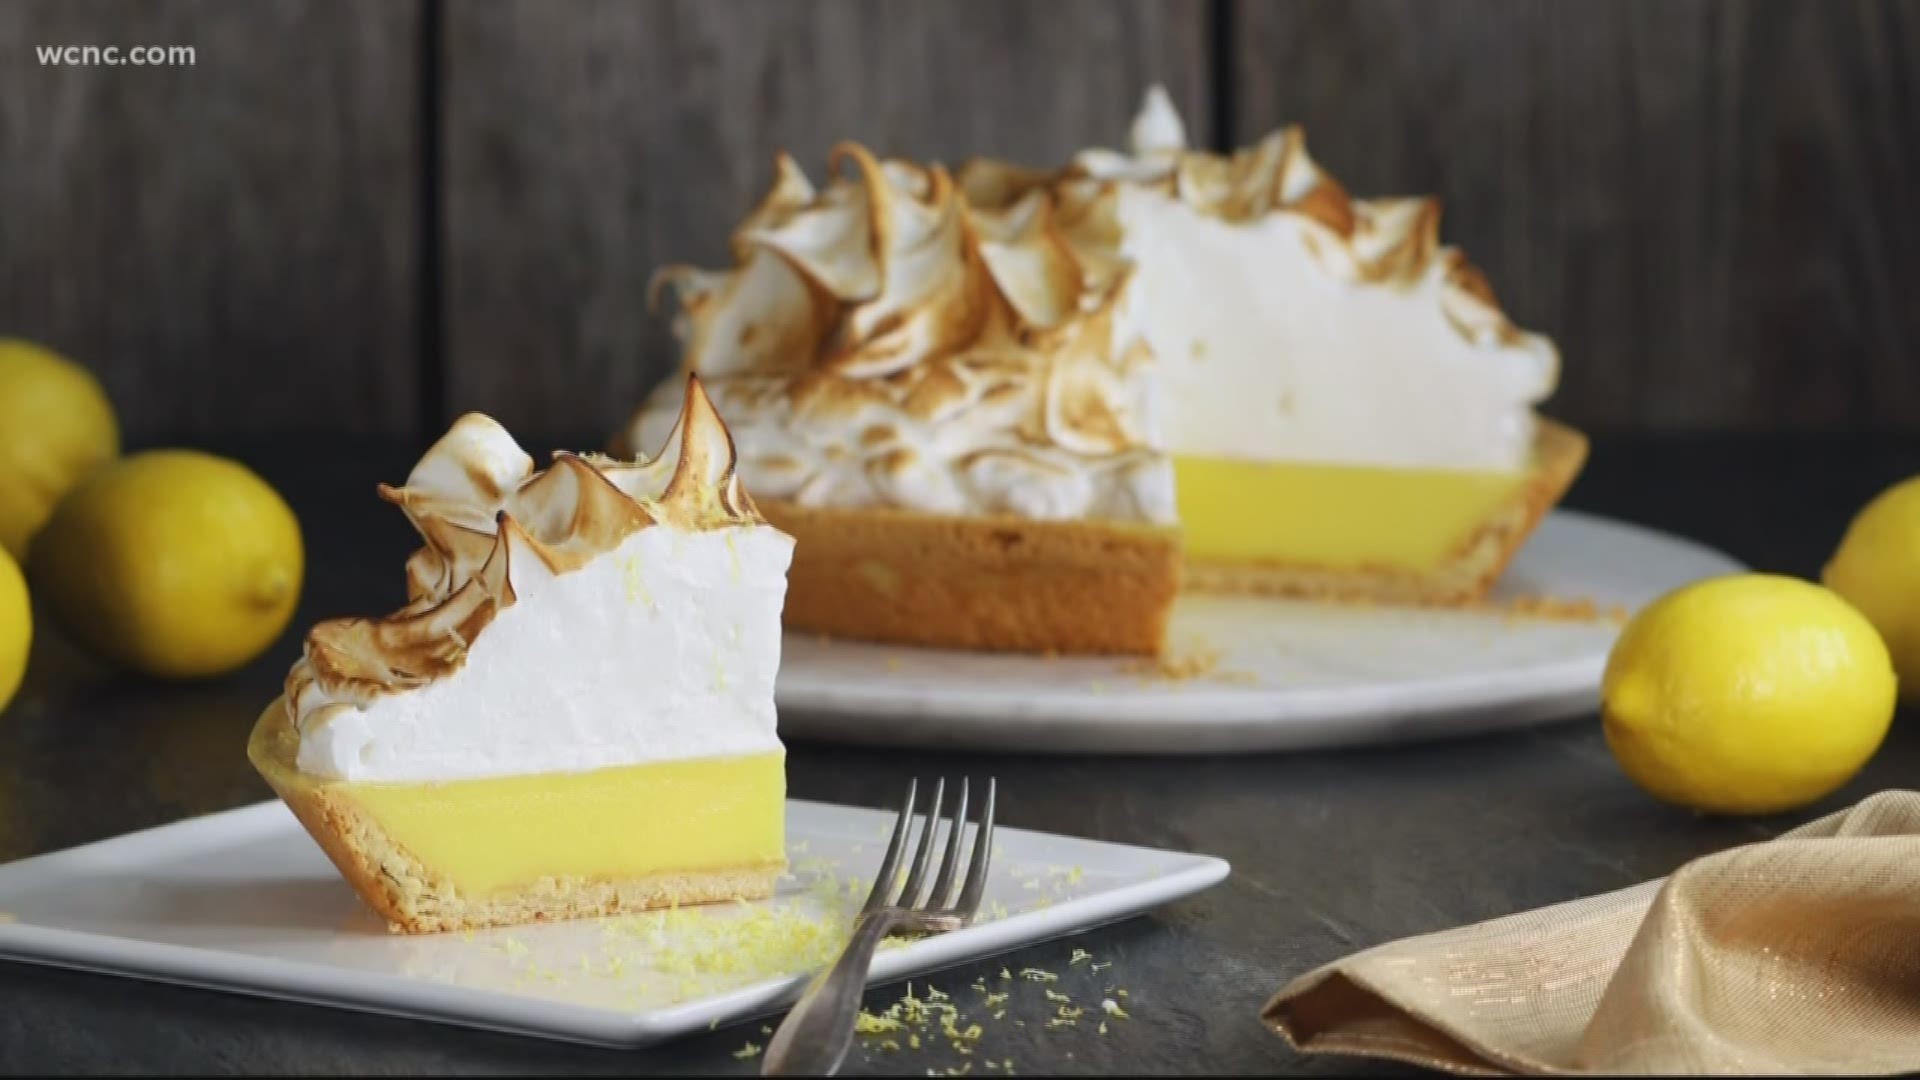 This healthier version of the classic lemon meringue pie will satisfy your sweet tooth with a fraction of the carbs.